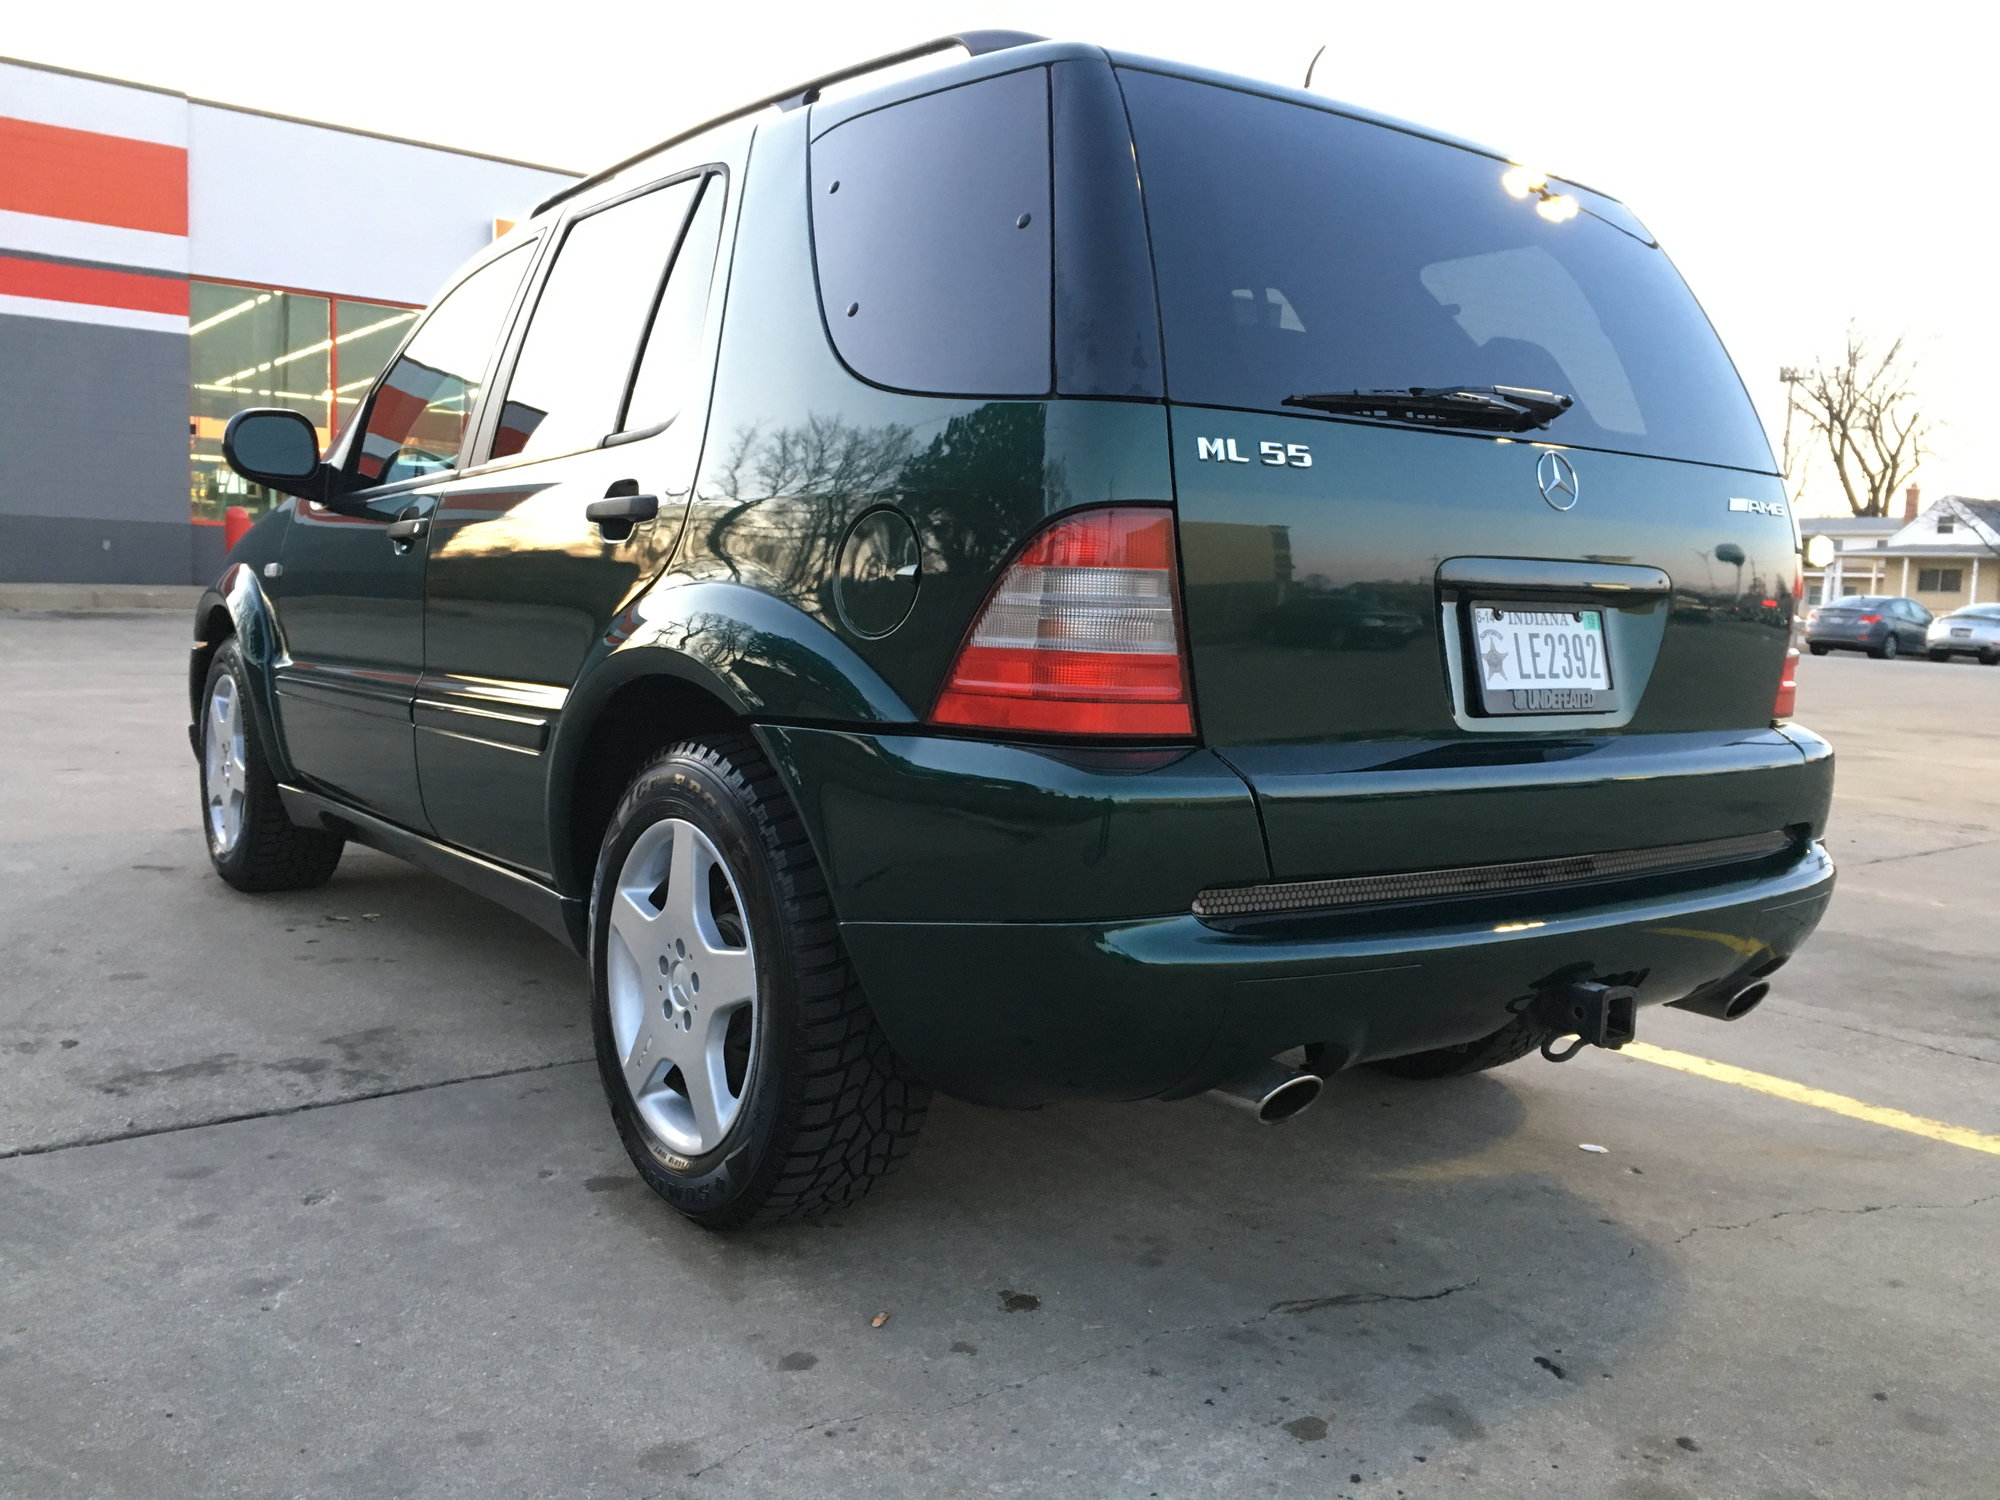 2001 Mercedes-Benz ML55 AMG - 2001 ML55 AMG. Low Miles. CALI Truck no Rust! Green/Black - Used - VIN 4JGAB74E01A227144 - 88,331 Miles - 8 cyl - AWD - Automatic - SUV - Other - Chicago, IL 60618, United States